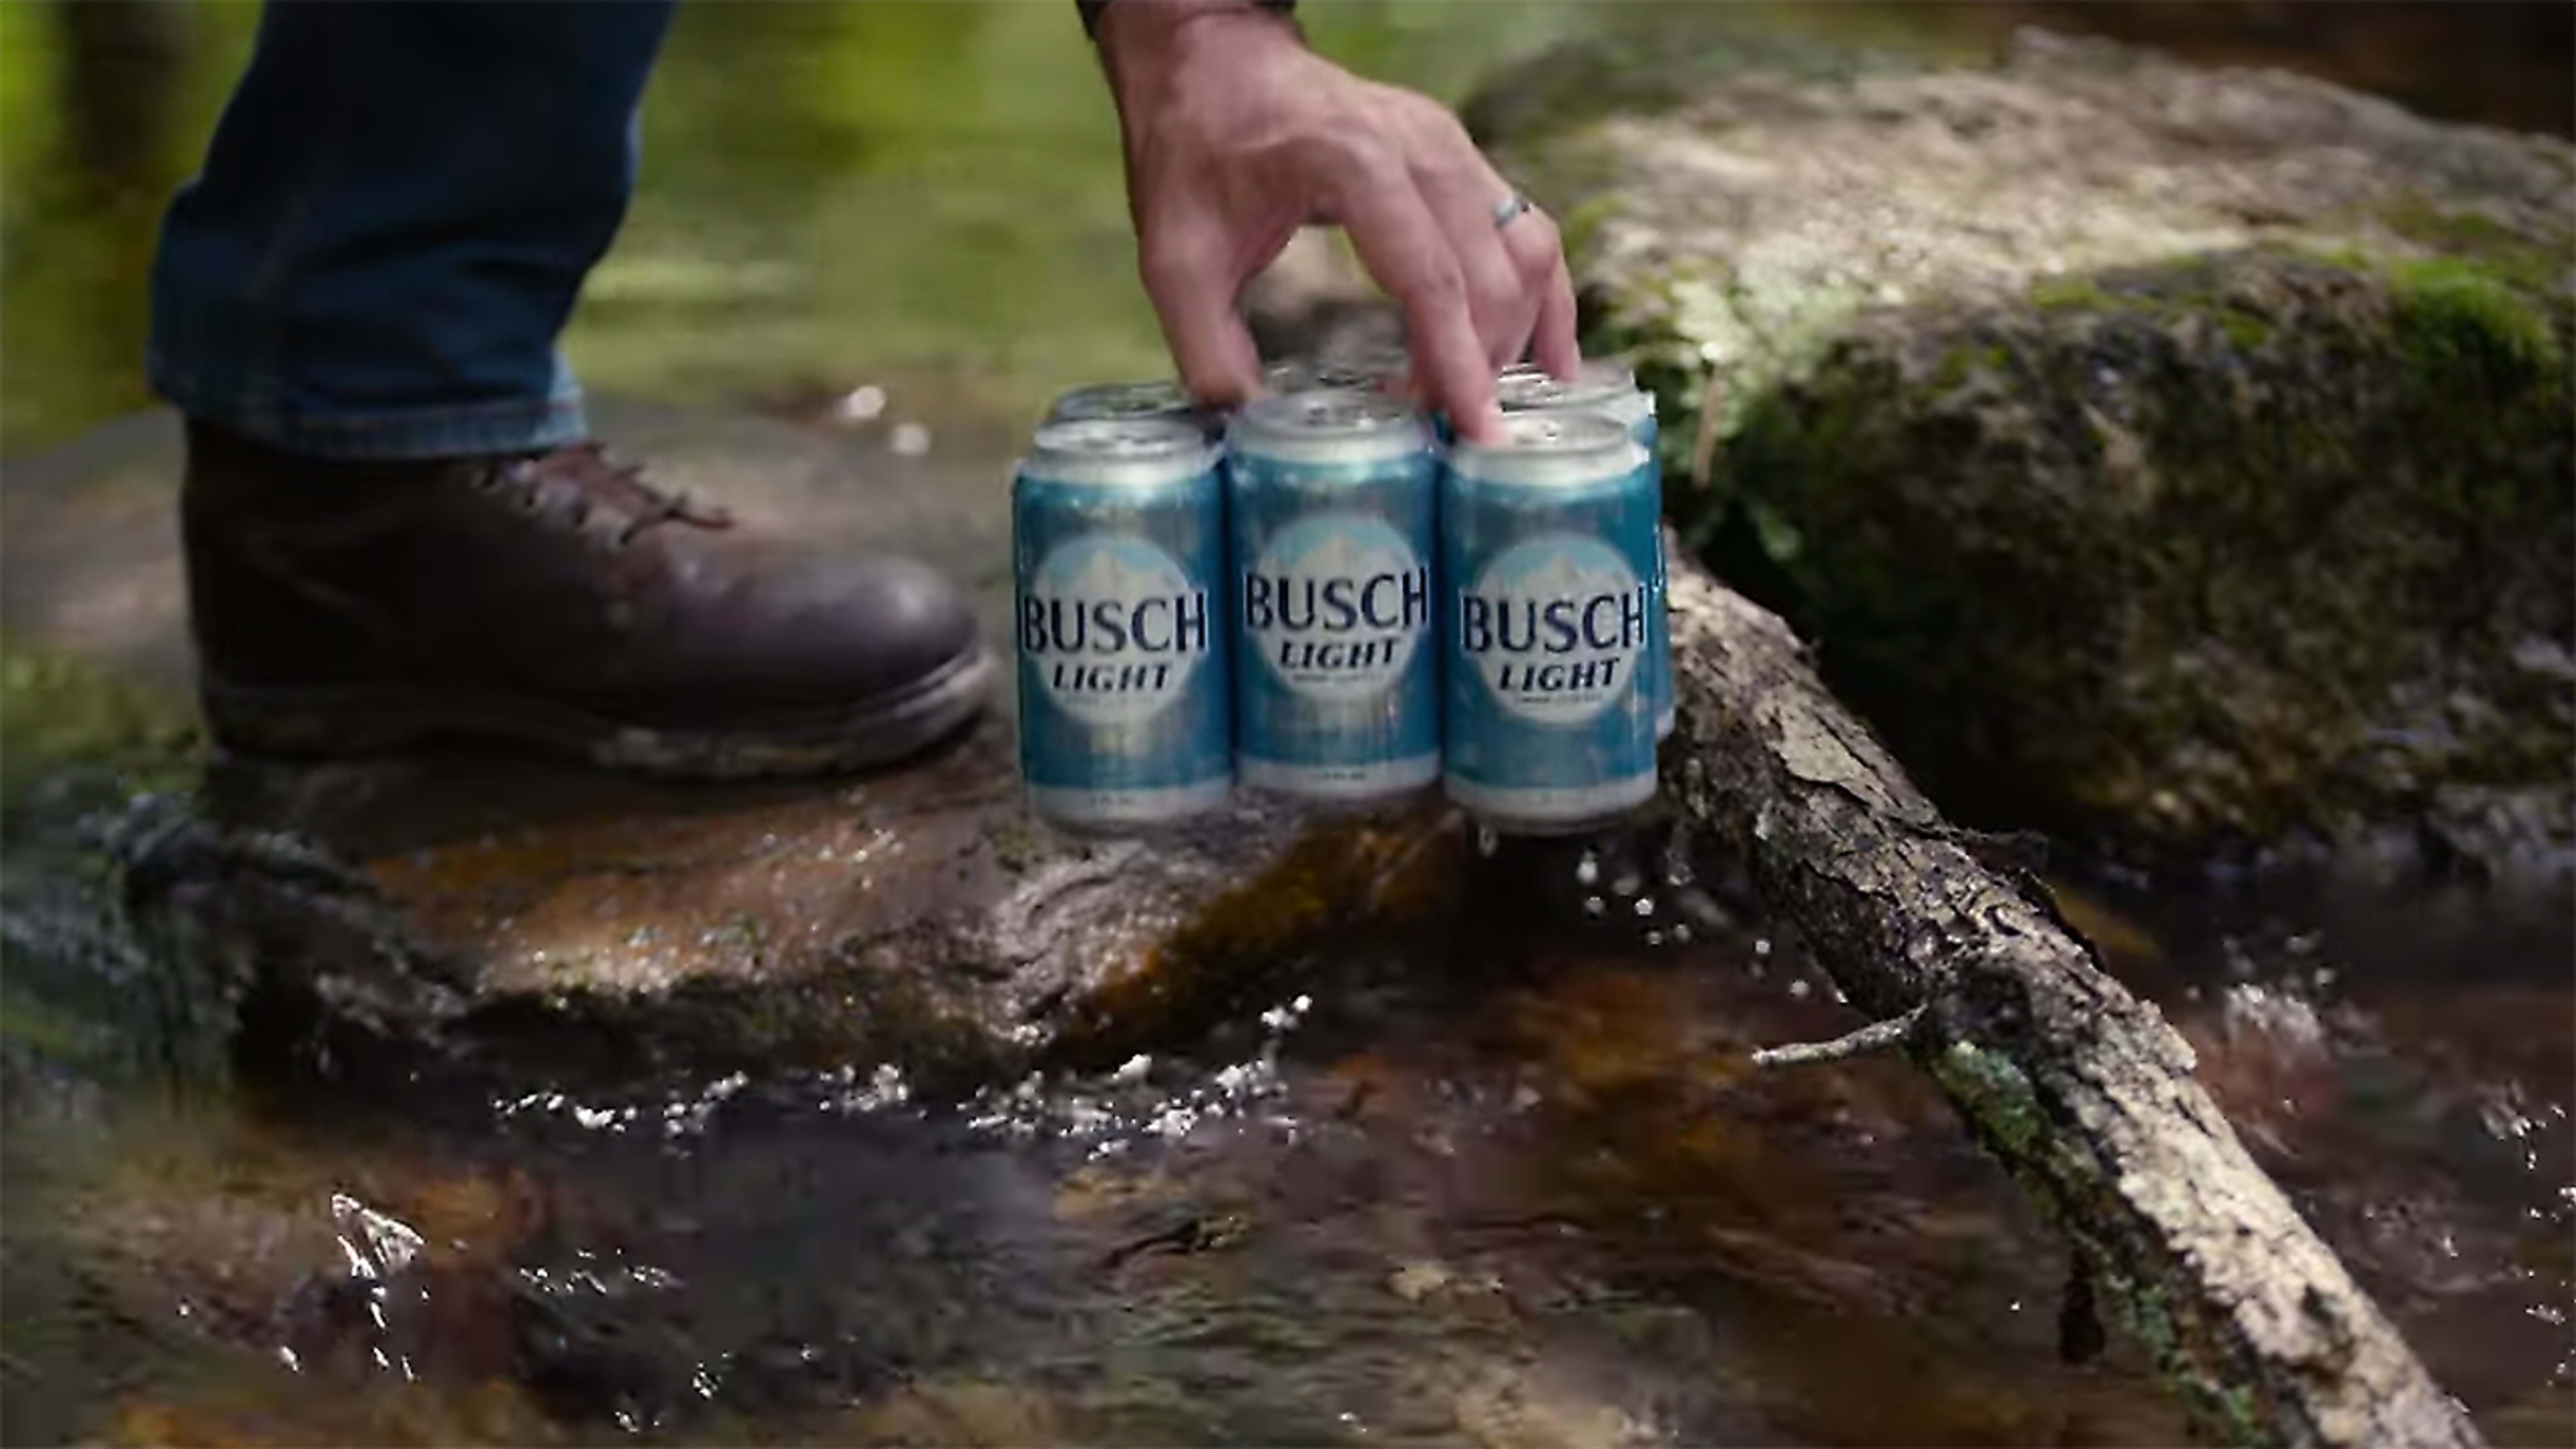 Busch beer’s pop-up shop is so exclusive, it’s hiding in the middle of a forest